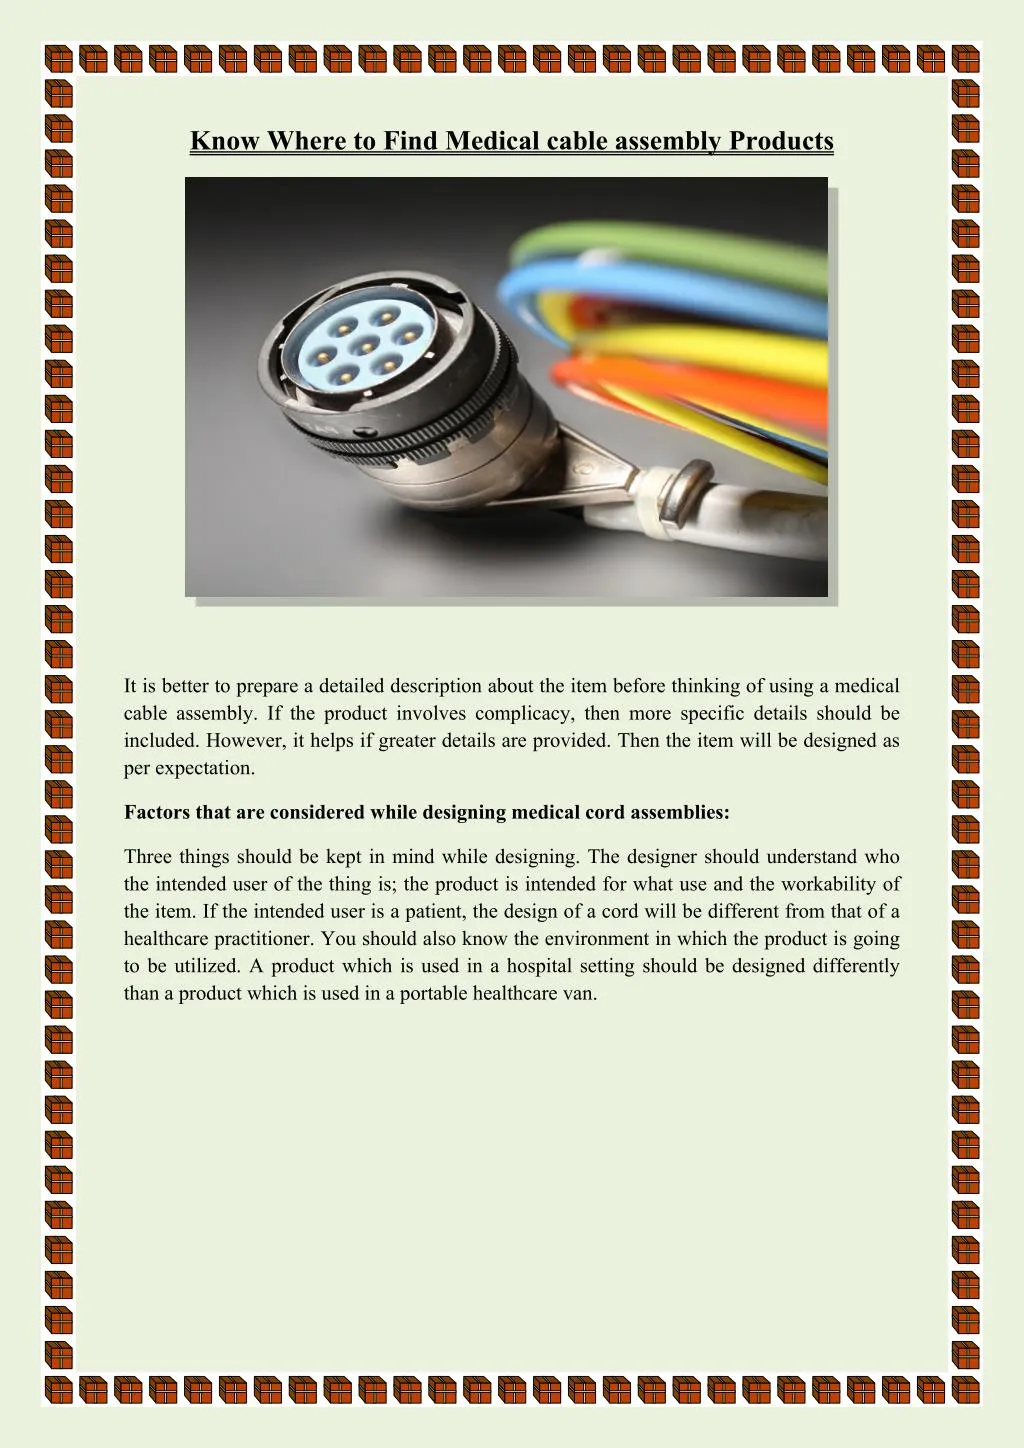 know where to find medical cable assembly products